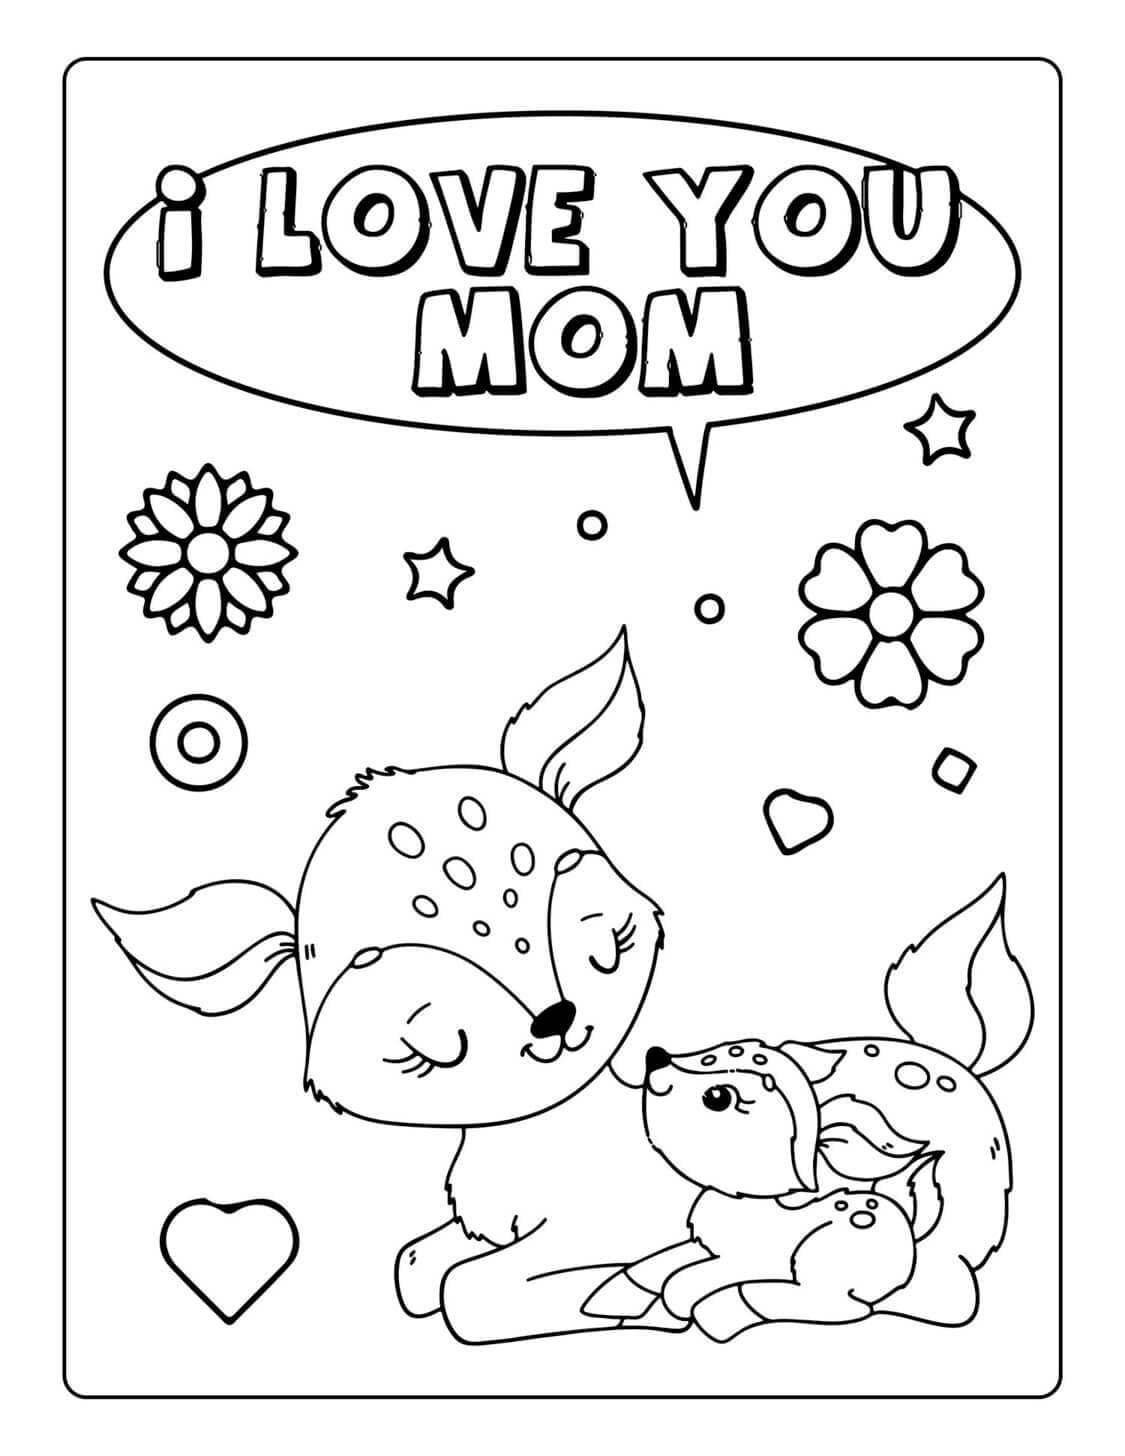 Je t’aime Maman 3 coloring page